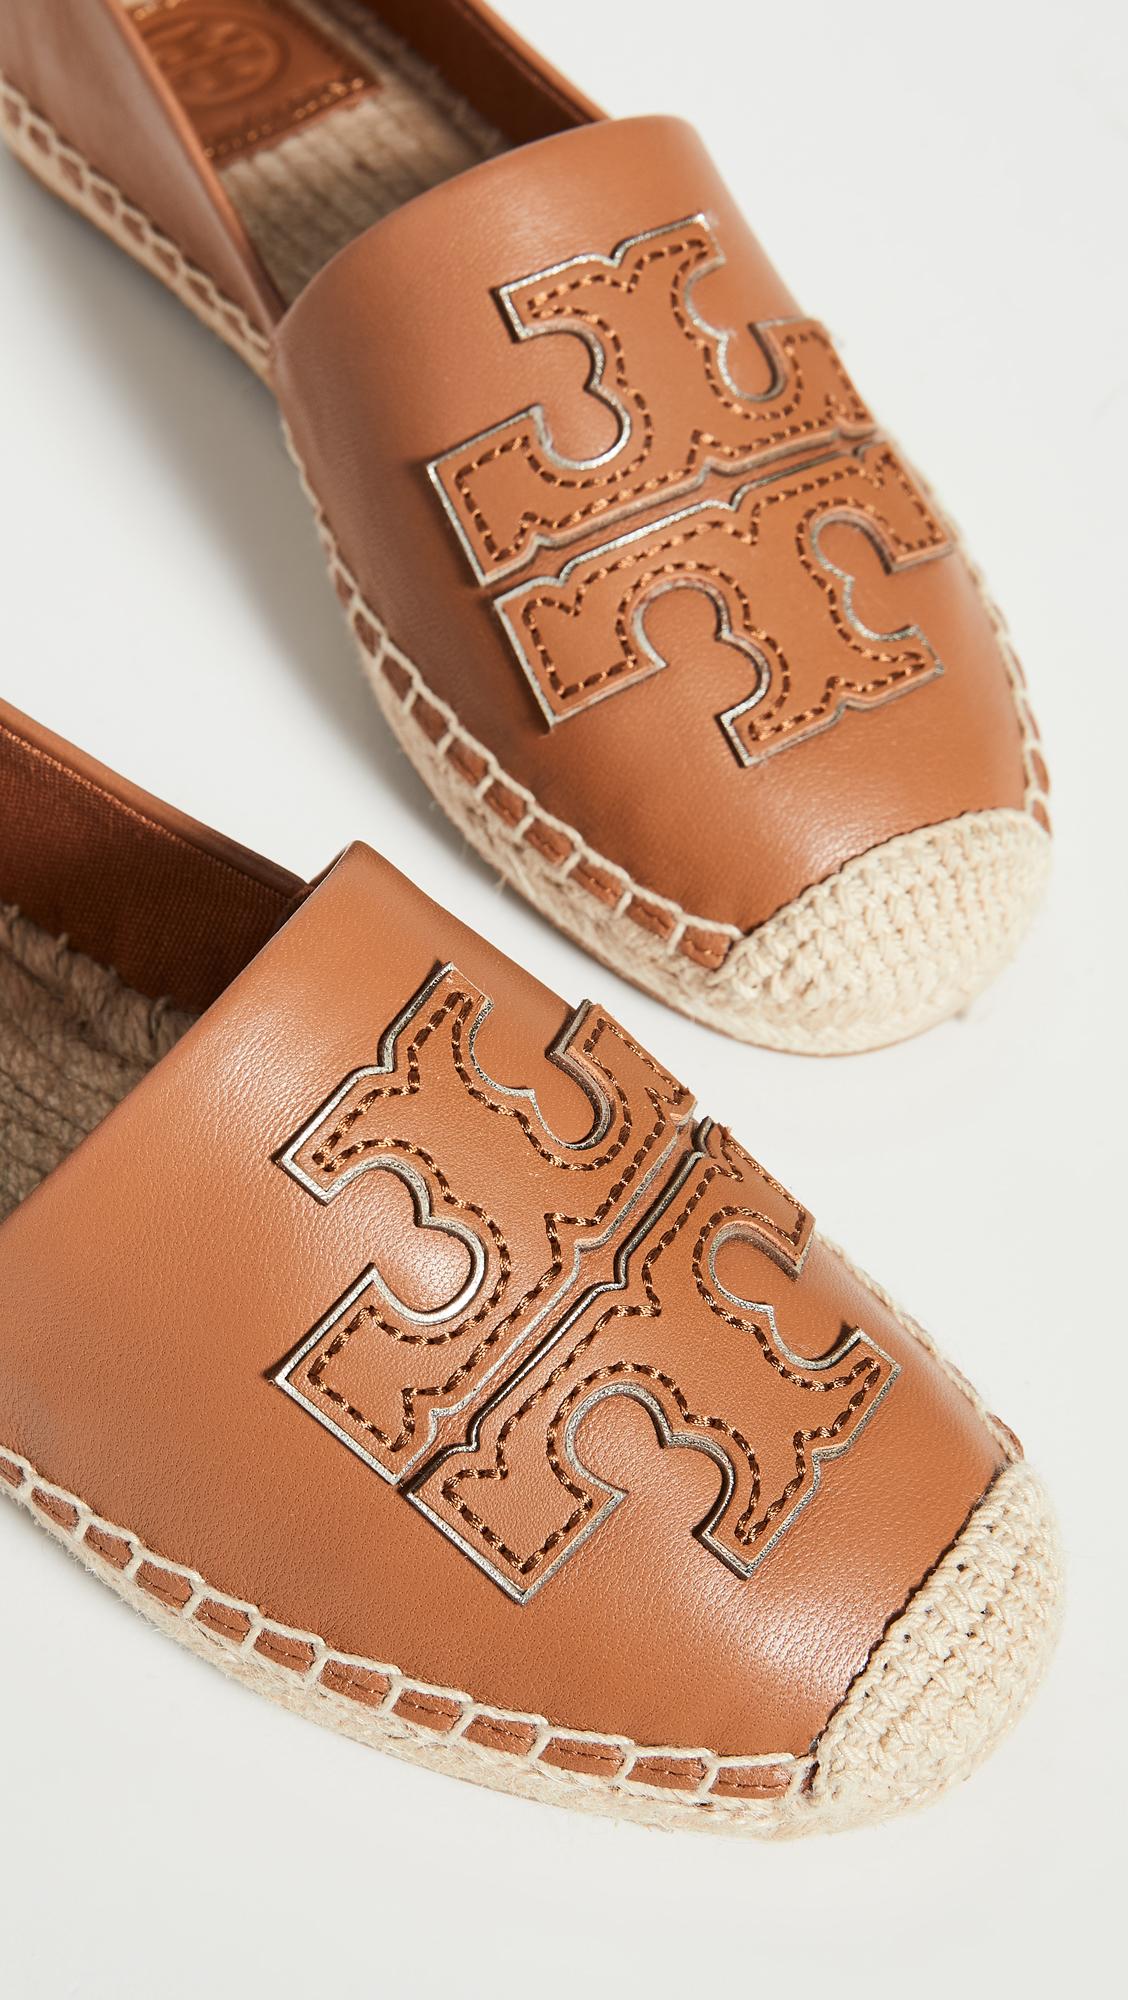 Tory Burch Ines Leather Espadrilles in Tan (Brown) - Save 60% | Lyst